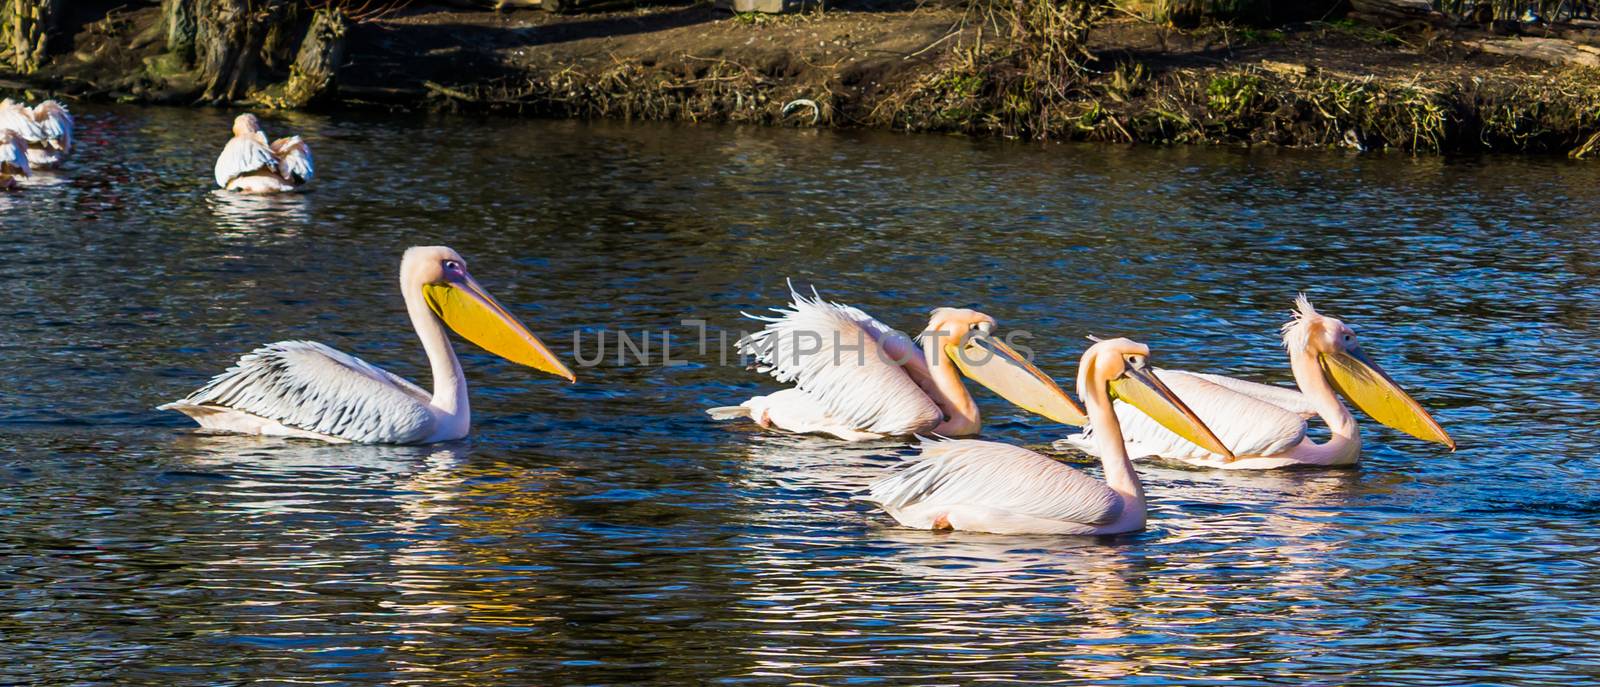 Family of rosy pelicans floating together in the water hunting for food, Birds from Eurasia by charlottebleijenberg